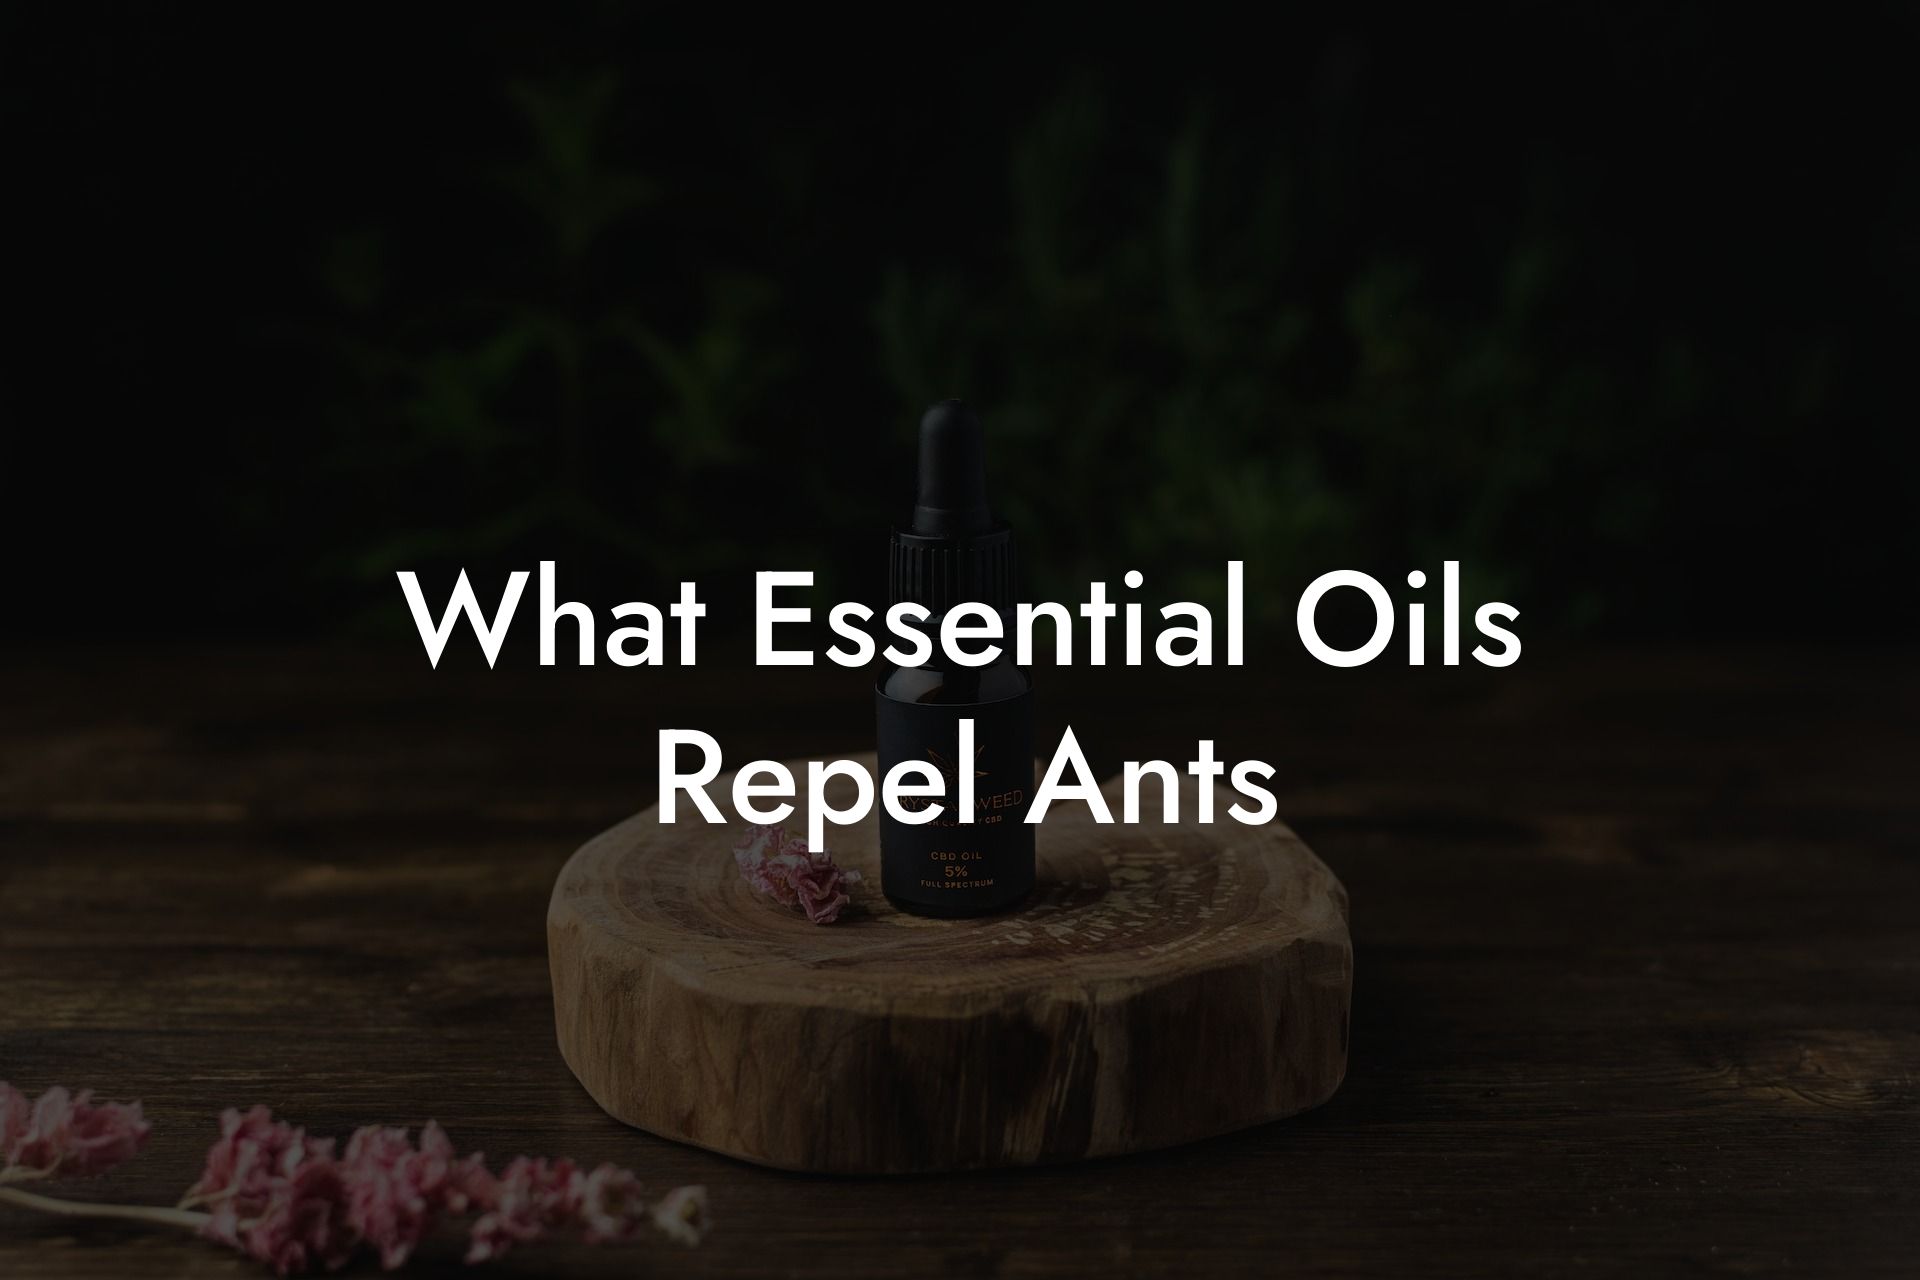 What Essential Oils Repel Ants